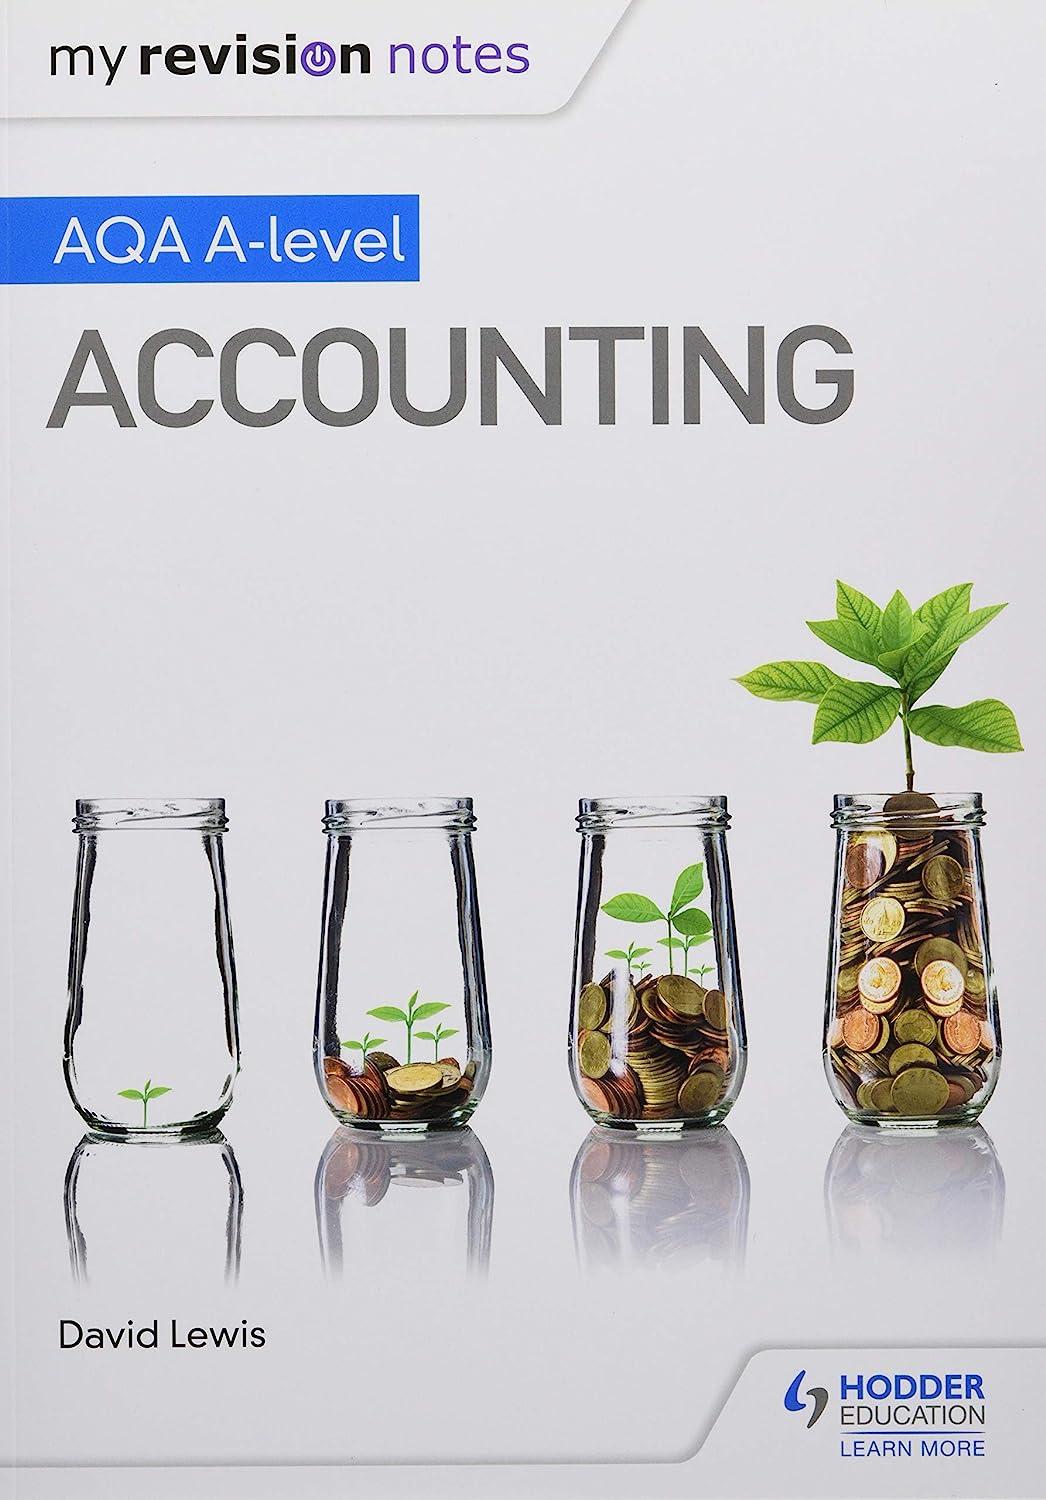 my revision notes aqa a level accounting 1st edition david lewis 1510449361, 978-1510449367